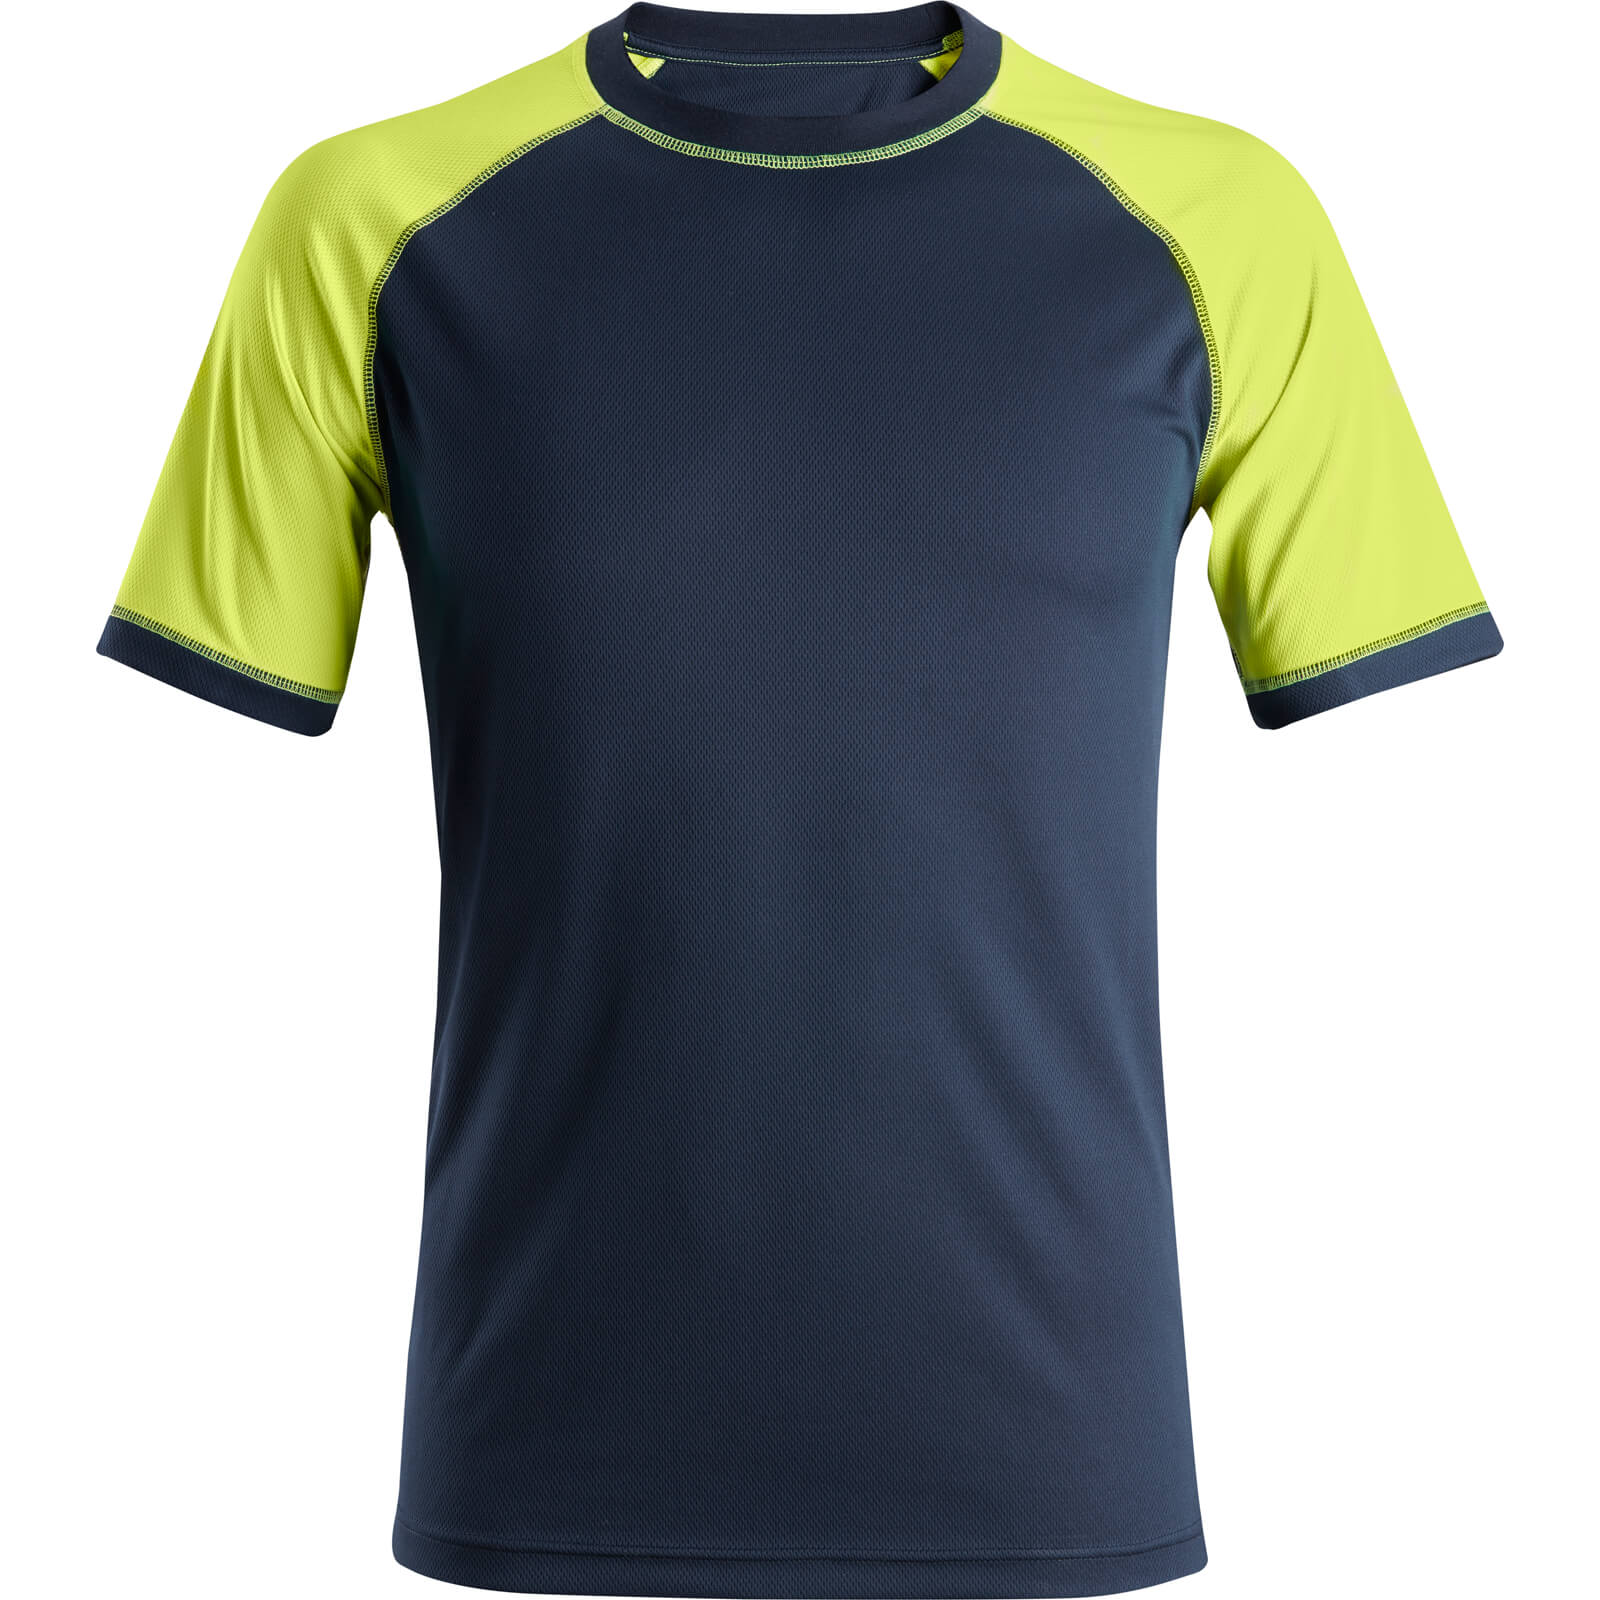 Image of Snickers 2505 Neon Short Sleeve T Shirt Navy L